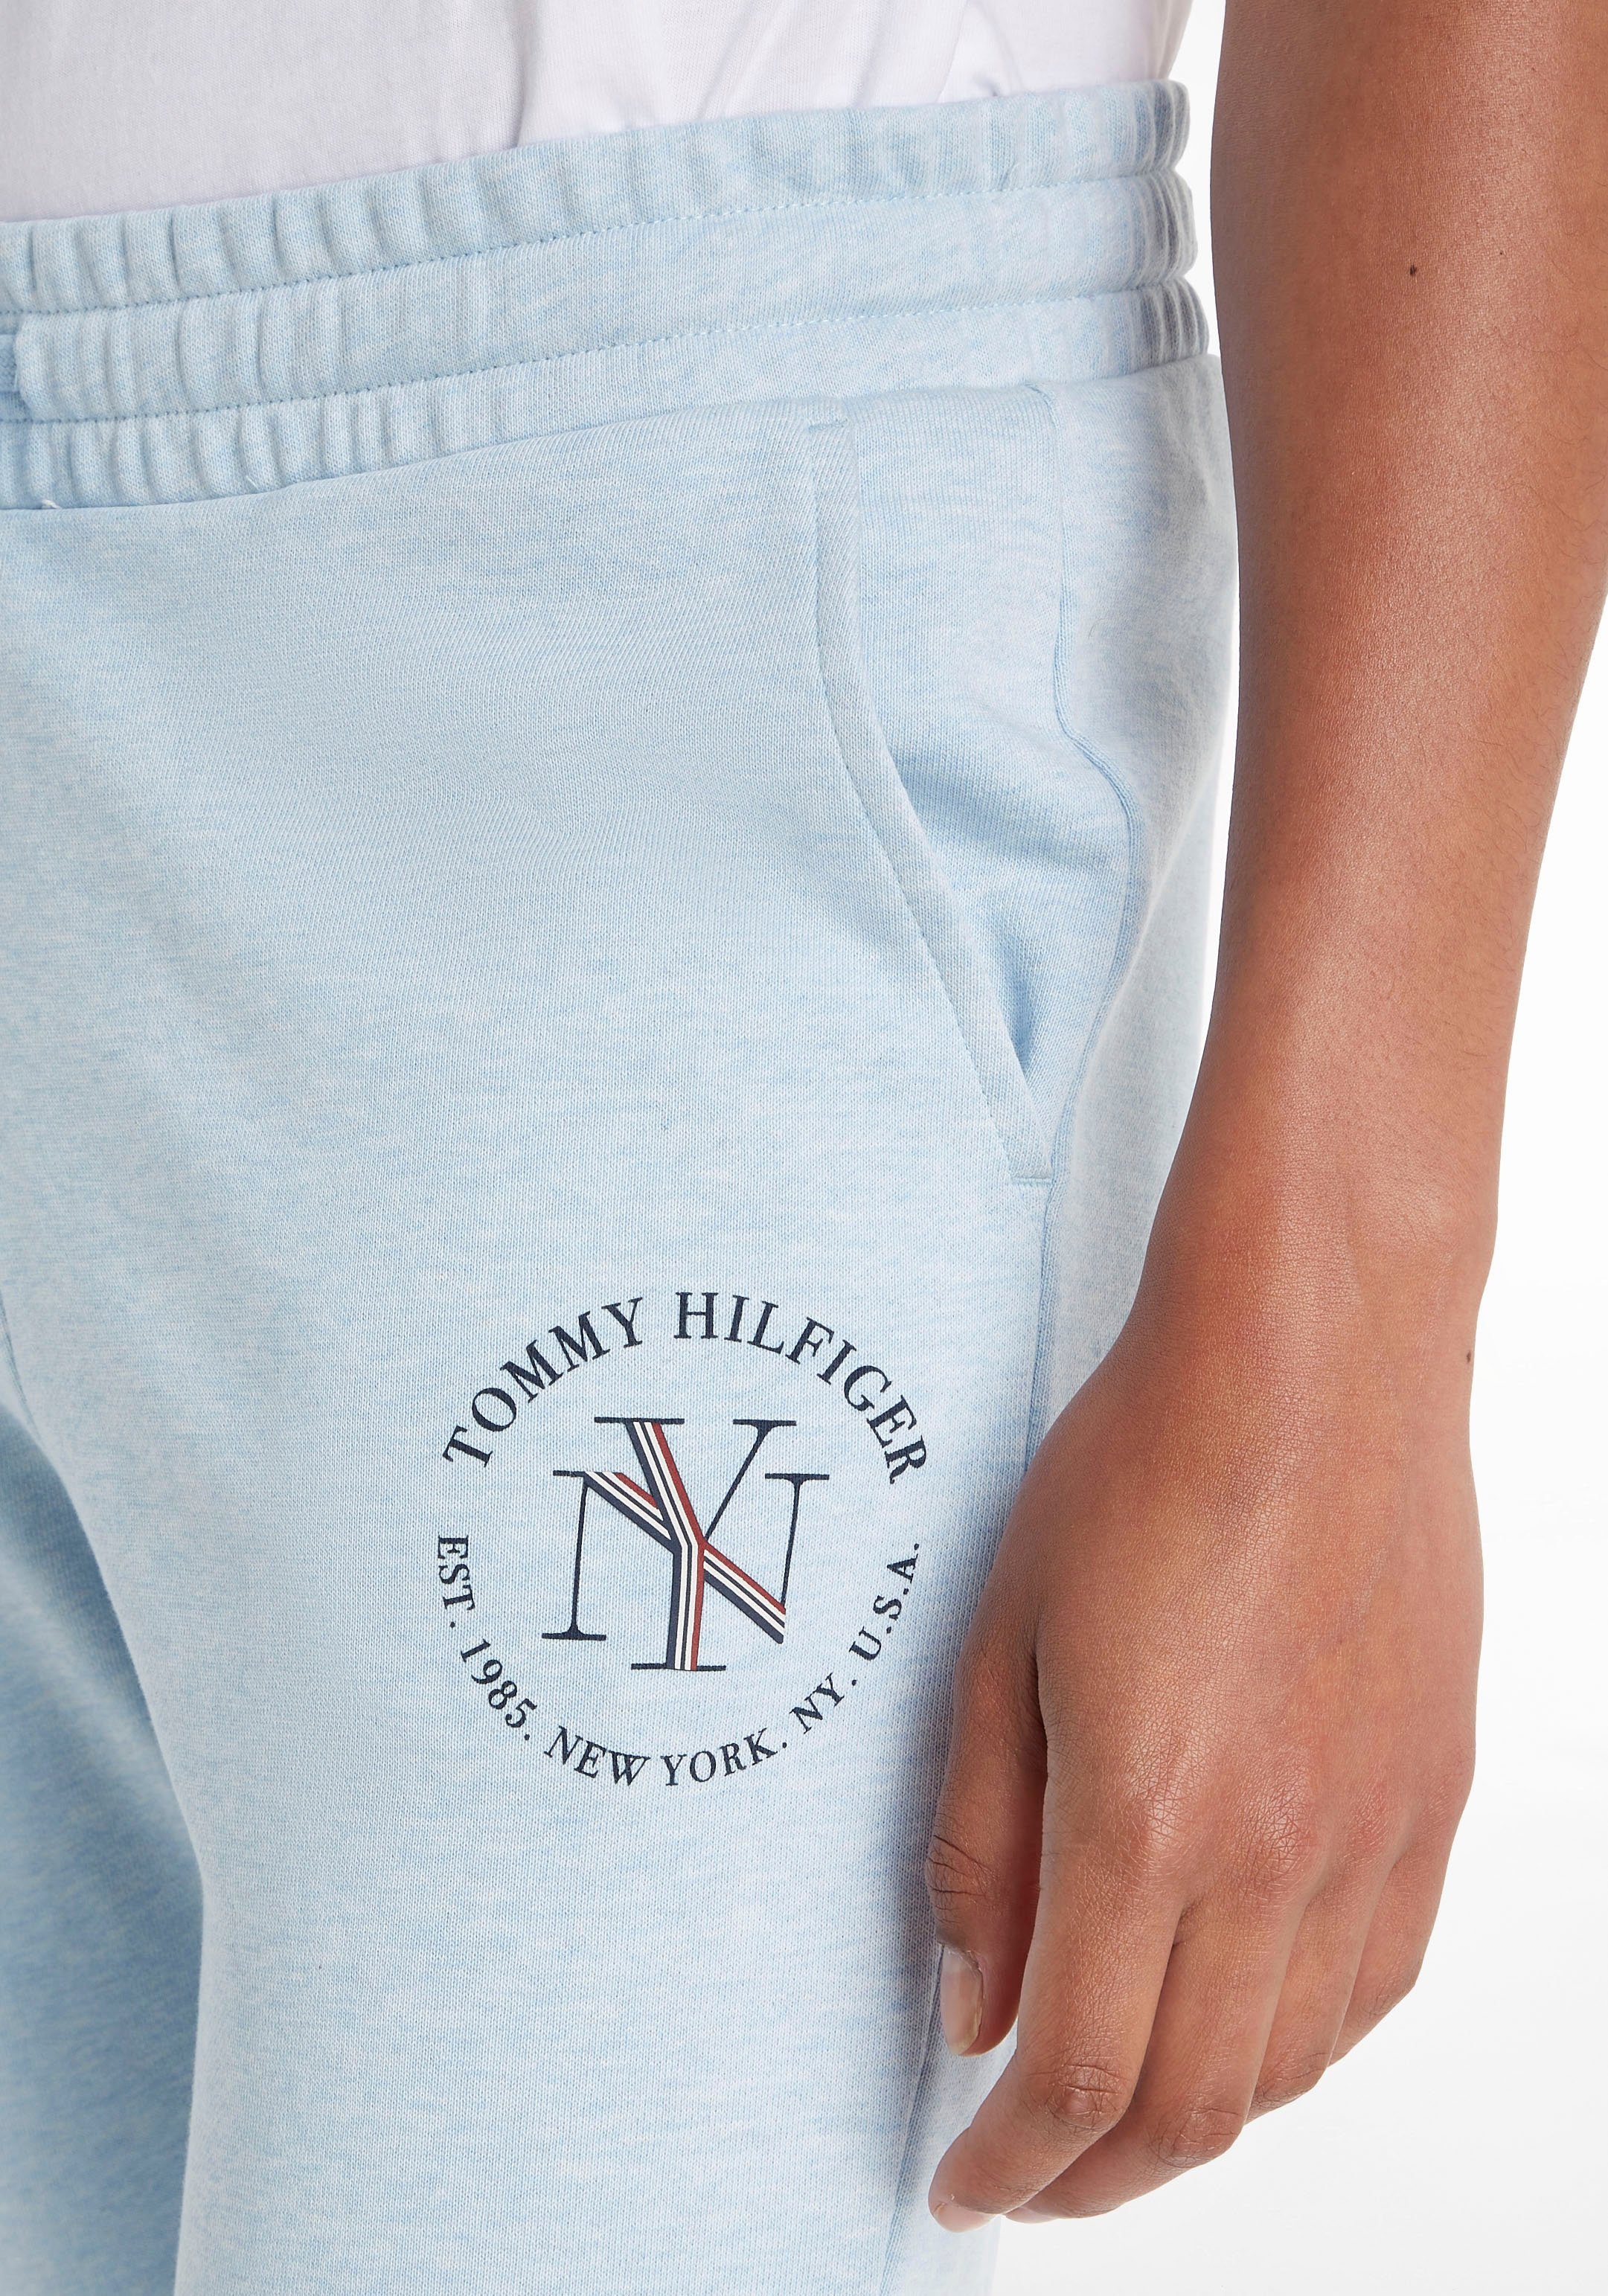 Markenlabel Tommy ROUNDALL Tommy Breezy-Blue-Heather Hilfiger Sweatpants Hilfiger mit NYC SWEATPANTS TAPERED